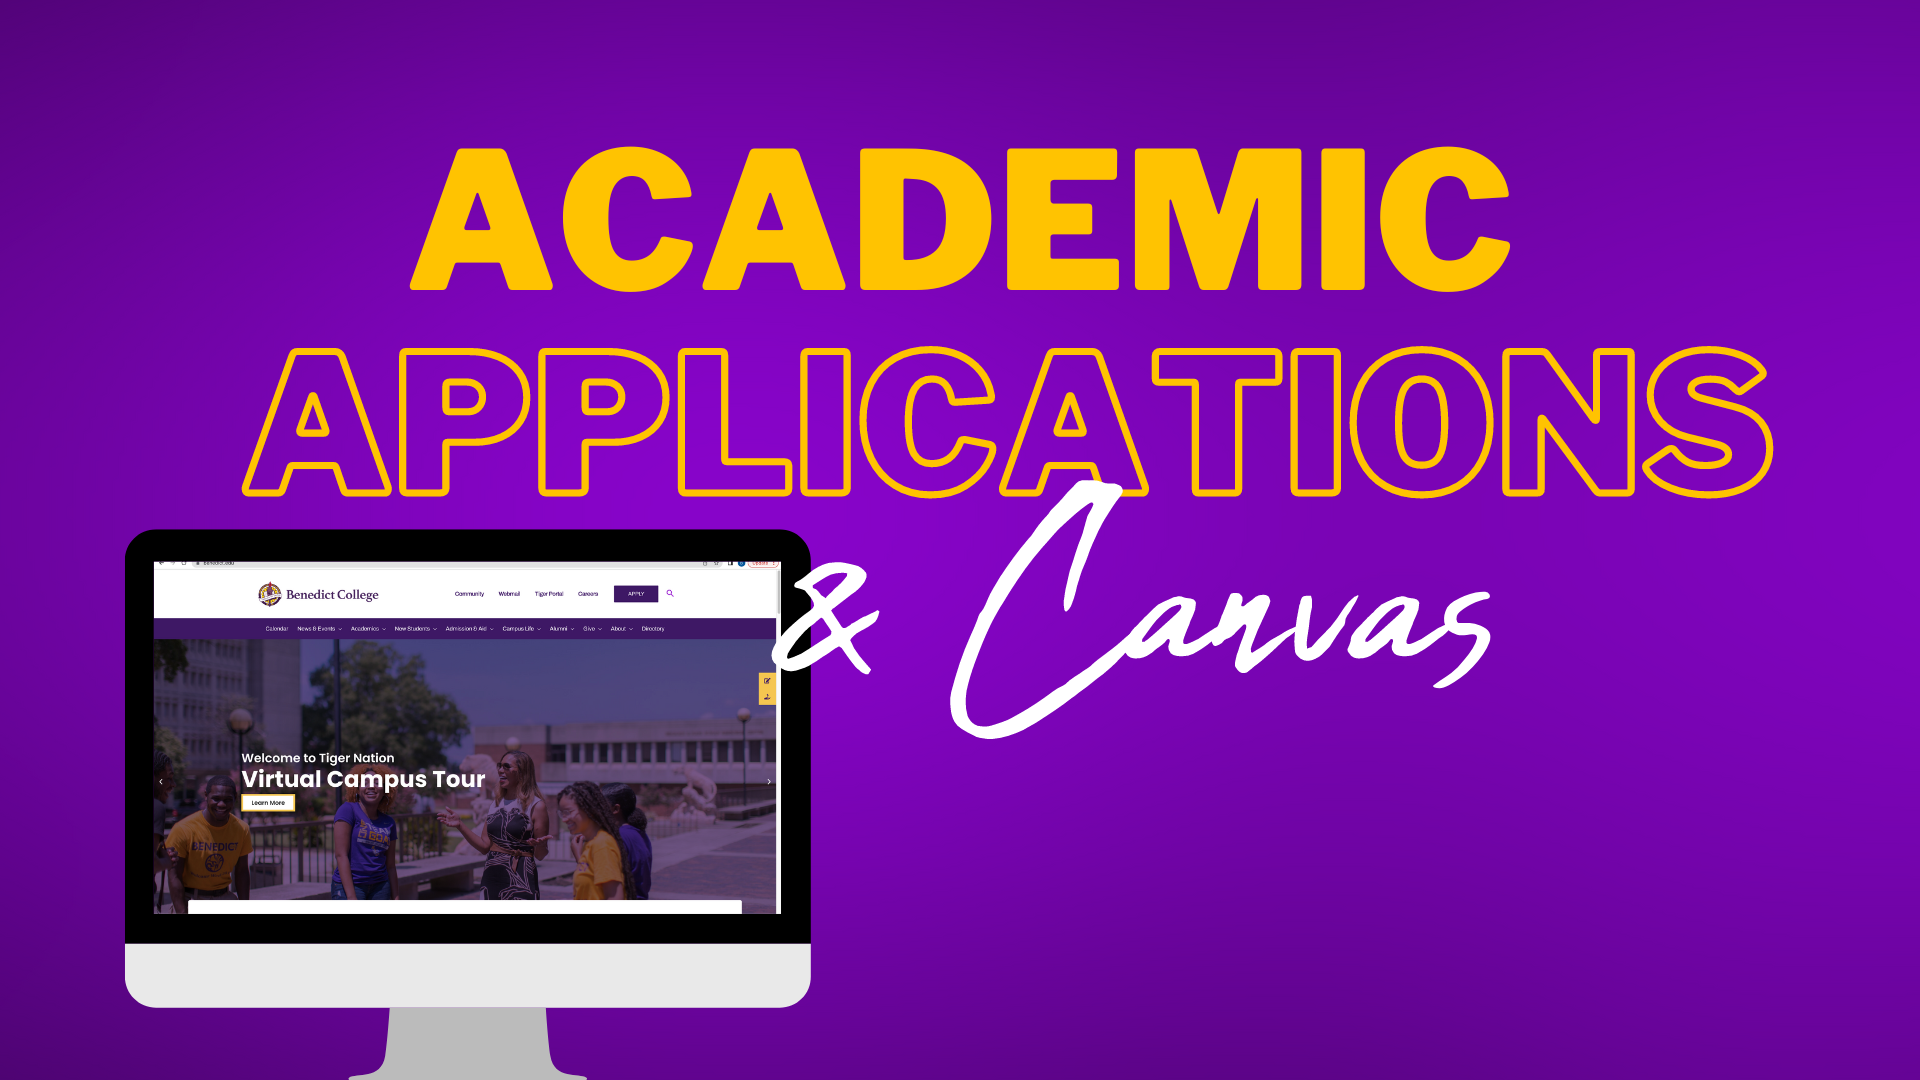 Applications and Canvas